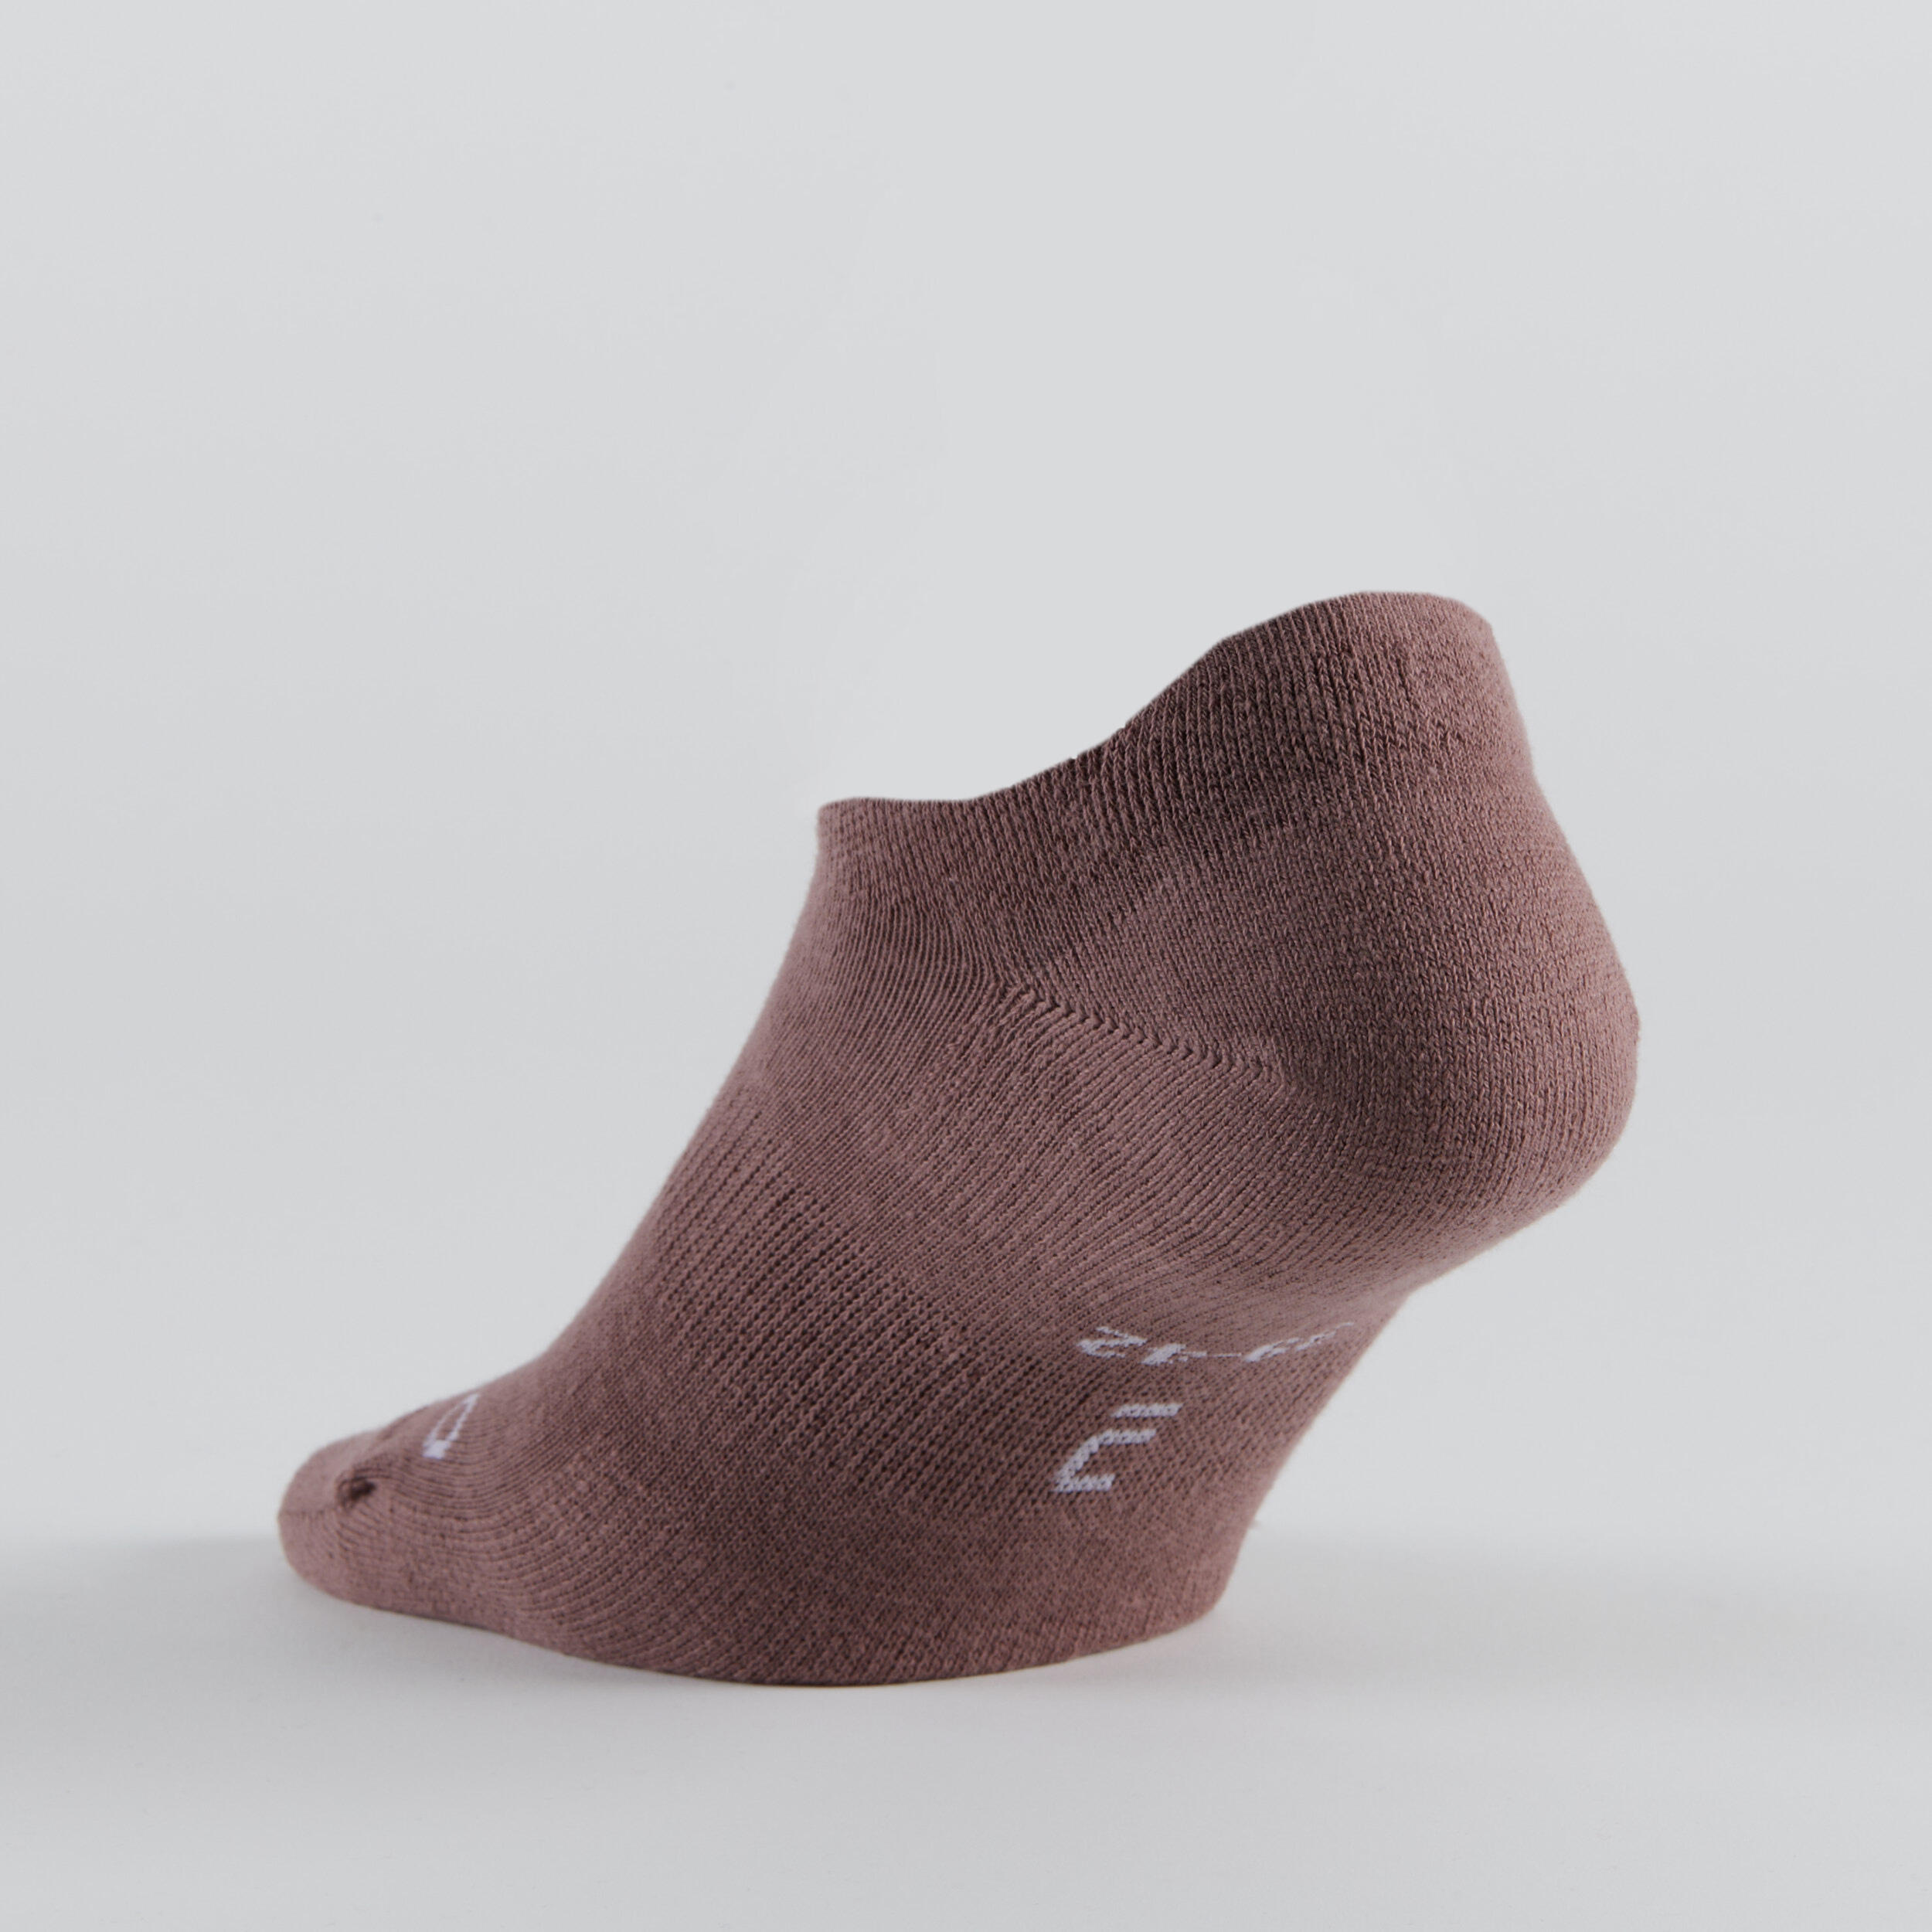 Low Sports Socks Tri-Pack RS 160 - Camo/Taupe/White 9/14